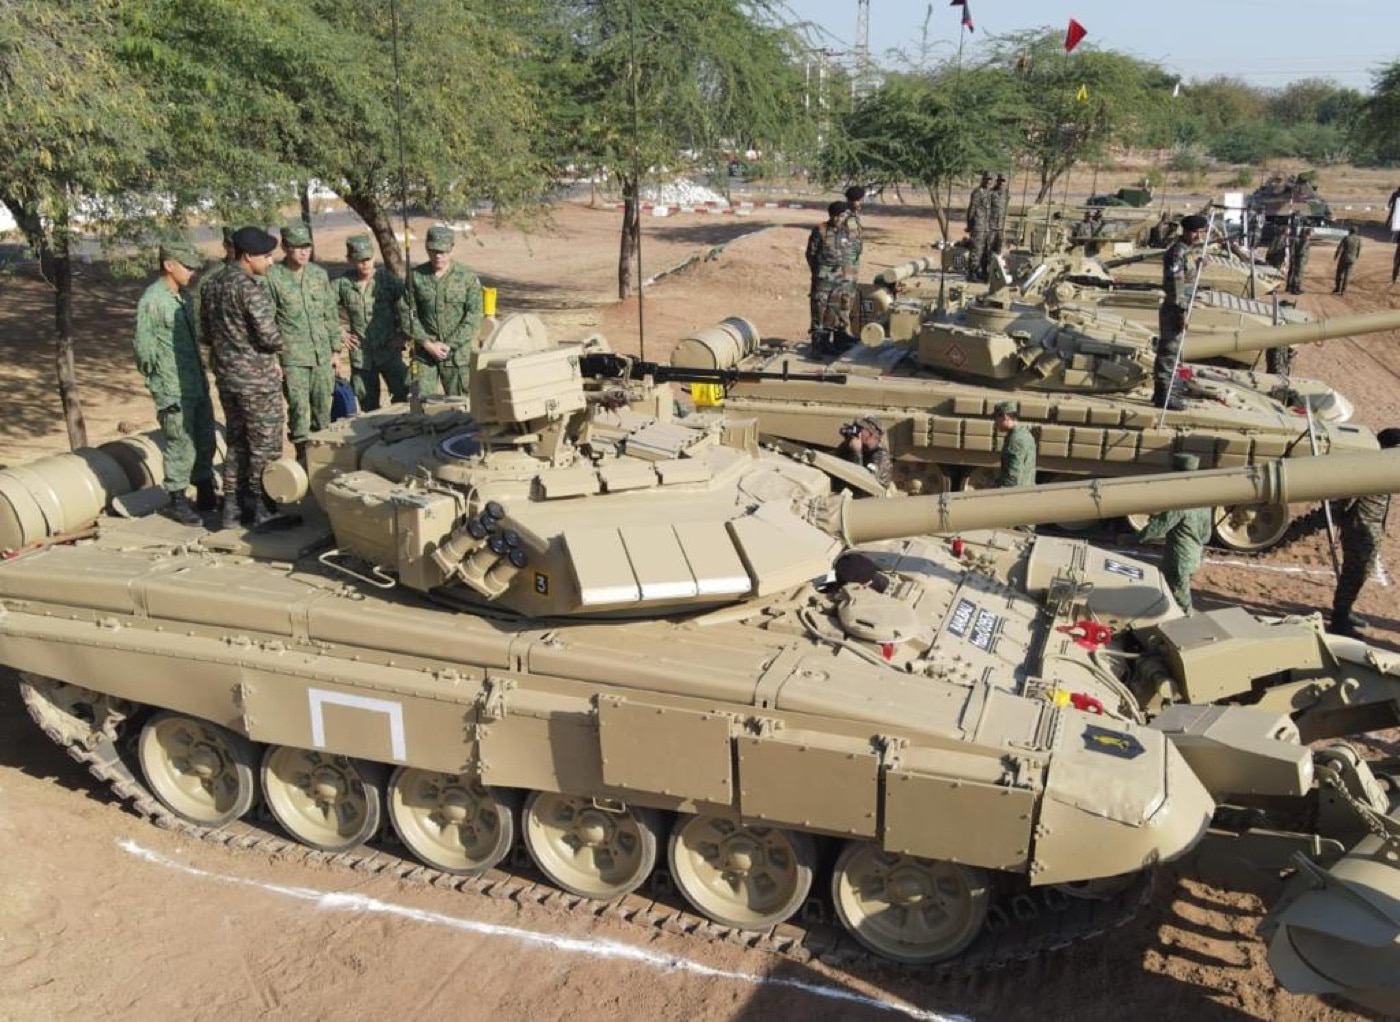 Indian Army T-90 tank inspected during Exercise Bold Kurukshetra in March 2023. This is a wargaming exercise between the Singapore Army and Indian Army. Image: Press Information Bureau, Government of India